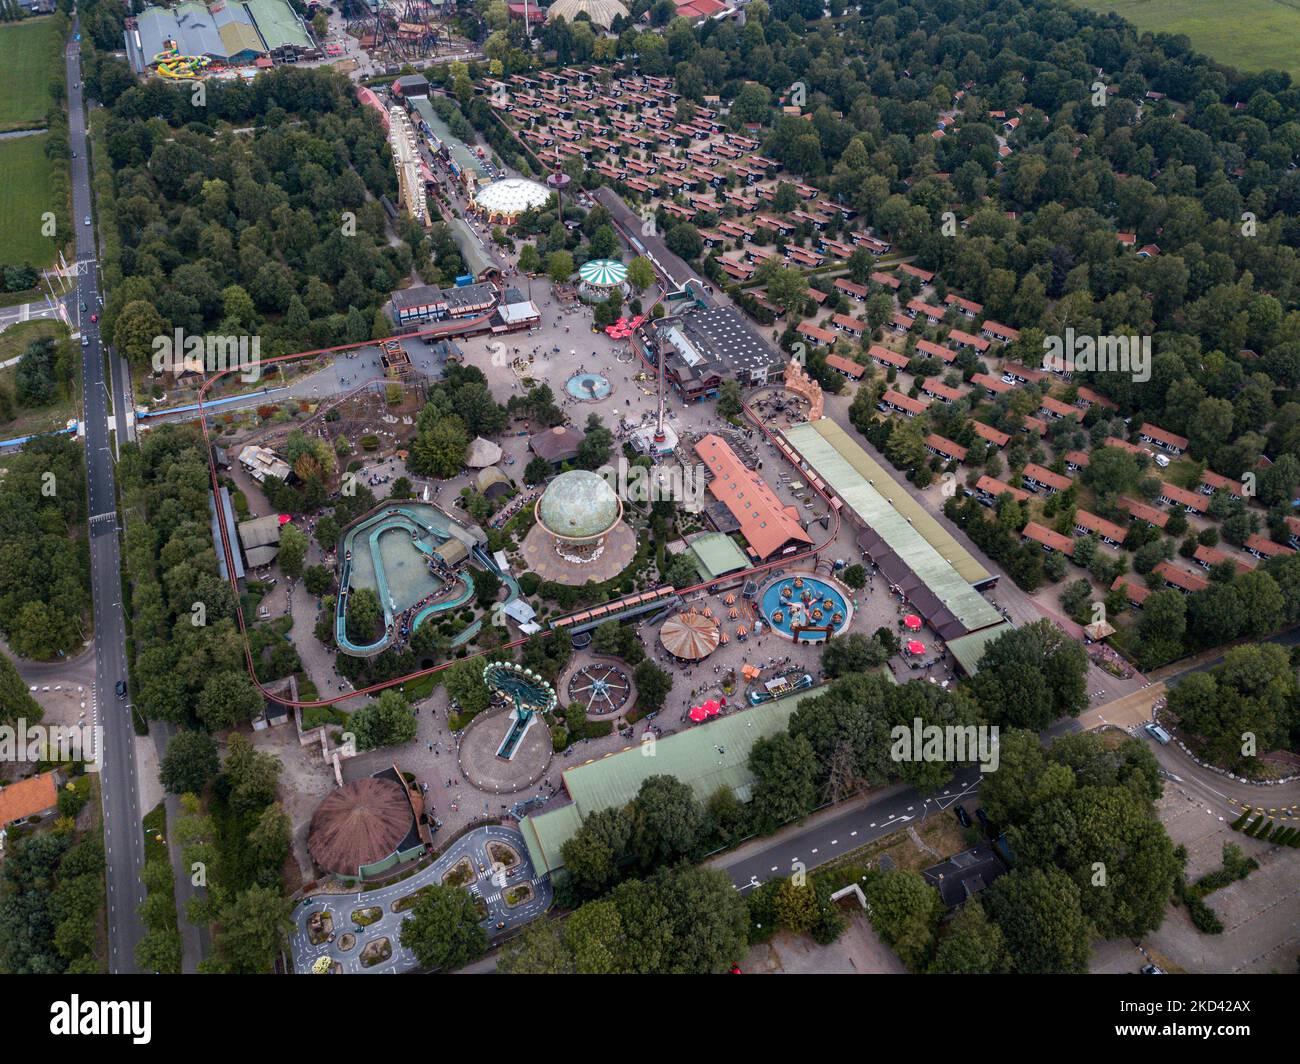 Walibi Holland Theme Park and Untamed RMC Rollercoaster Drone Shots Aerial Images Stock Photo